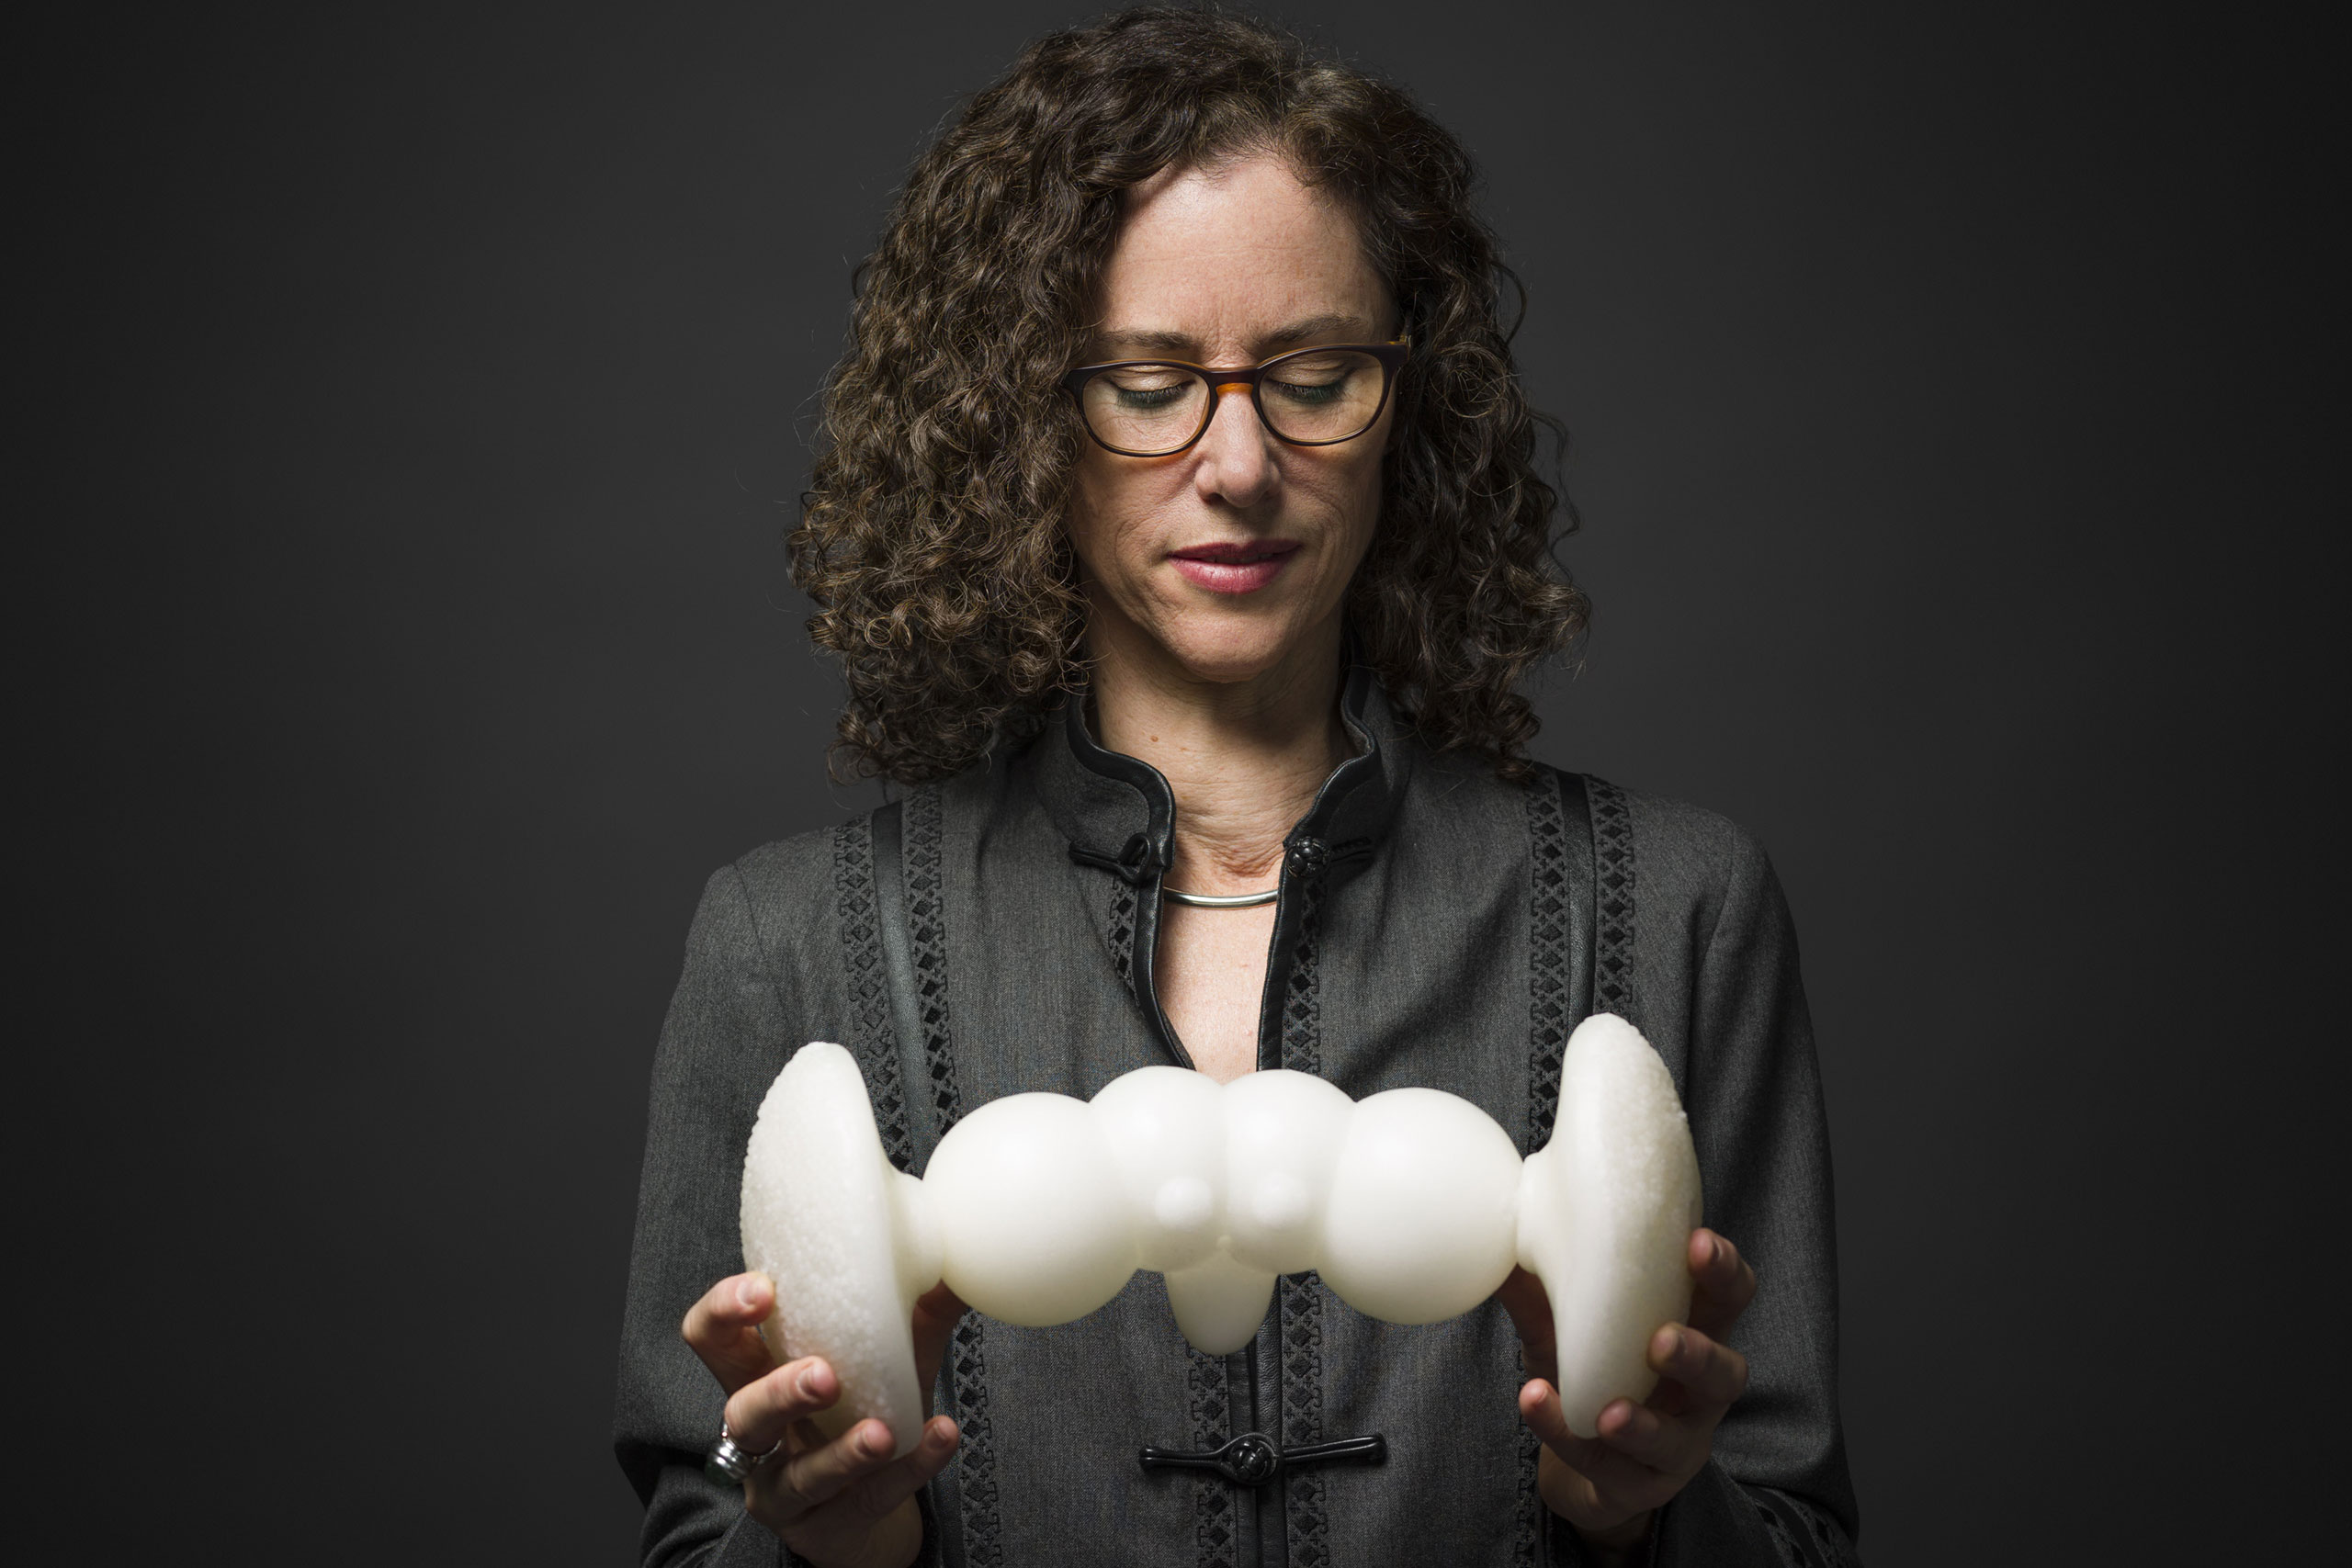 The artist Helen Pynor, wearing a dark shirt, glances down to a model of the visual circuit (visual nervous system) in the fruit fly Drosophila melanogaster, she holds with both hands. Helen made the model whilst in residence in the laboratory of neuroscientist Dr Iris Salecker at the Francis Crick Institute, London.